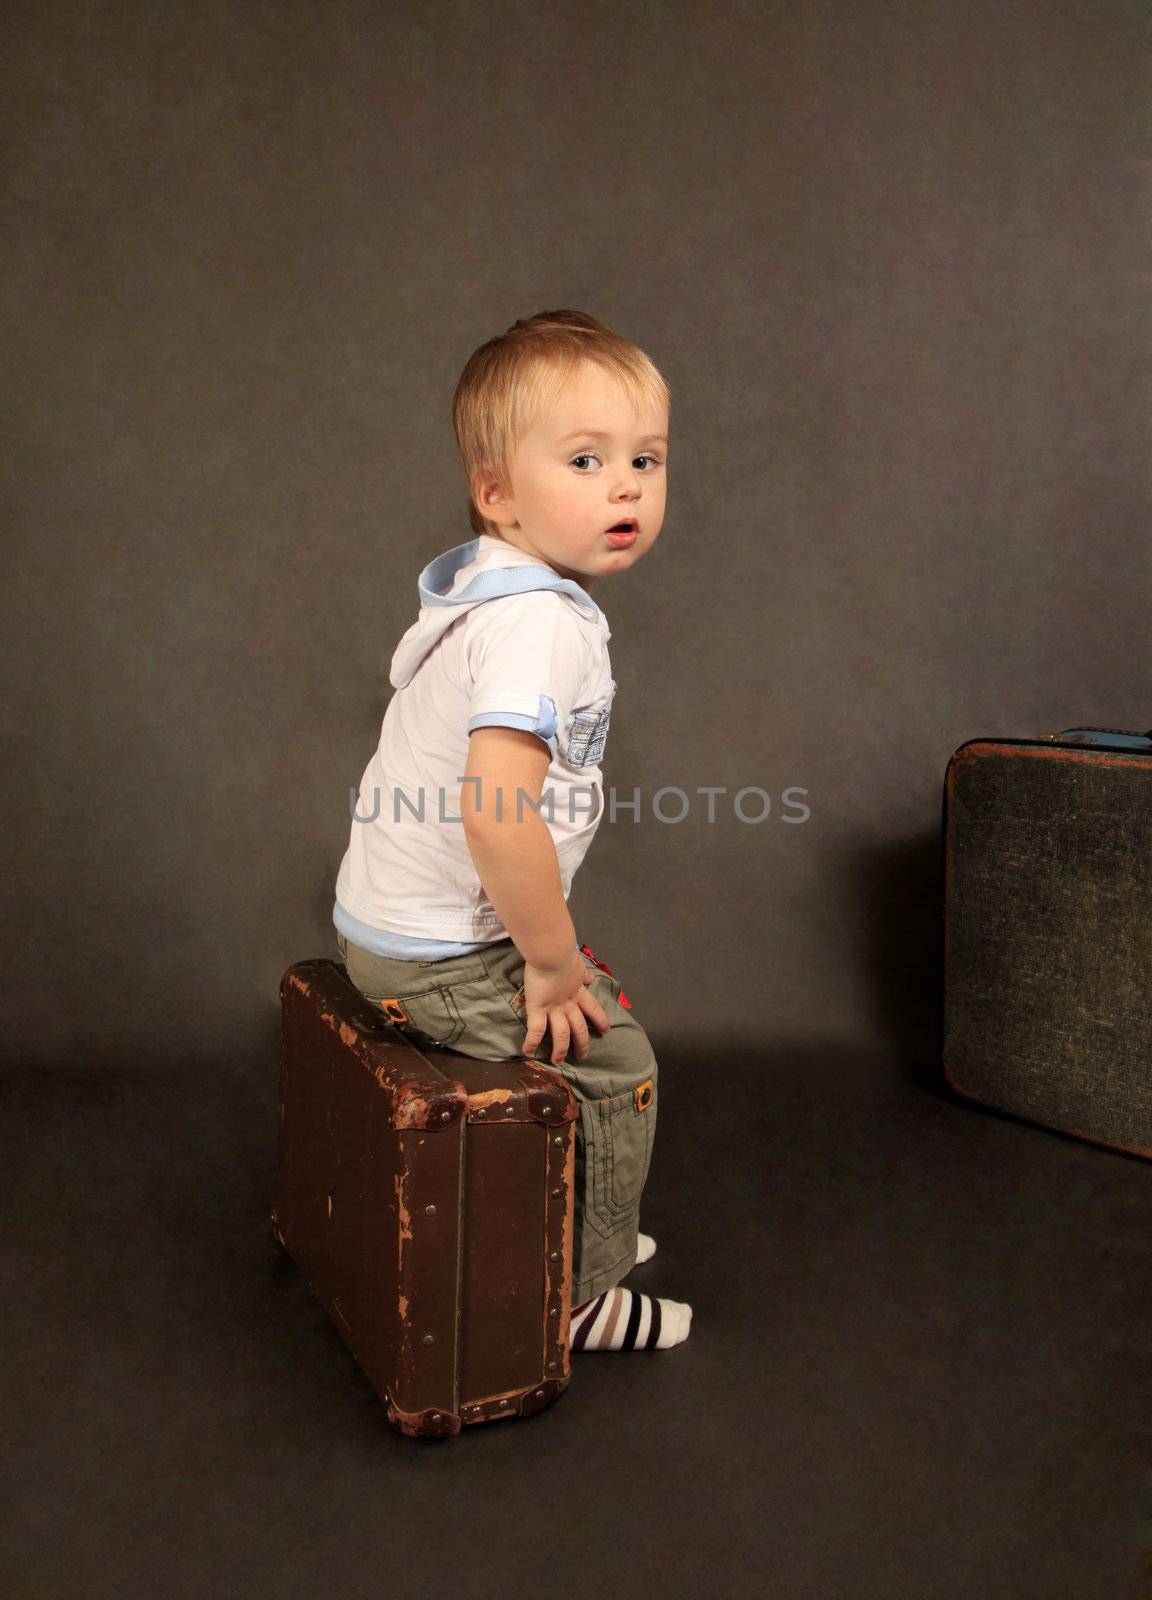 The little boy with two old suitcases